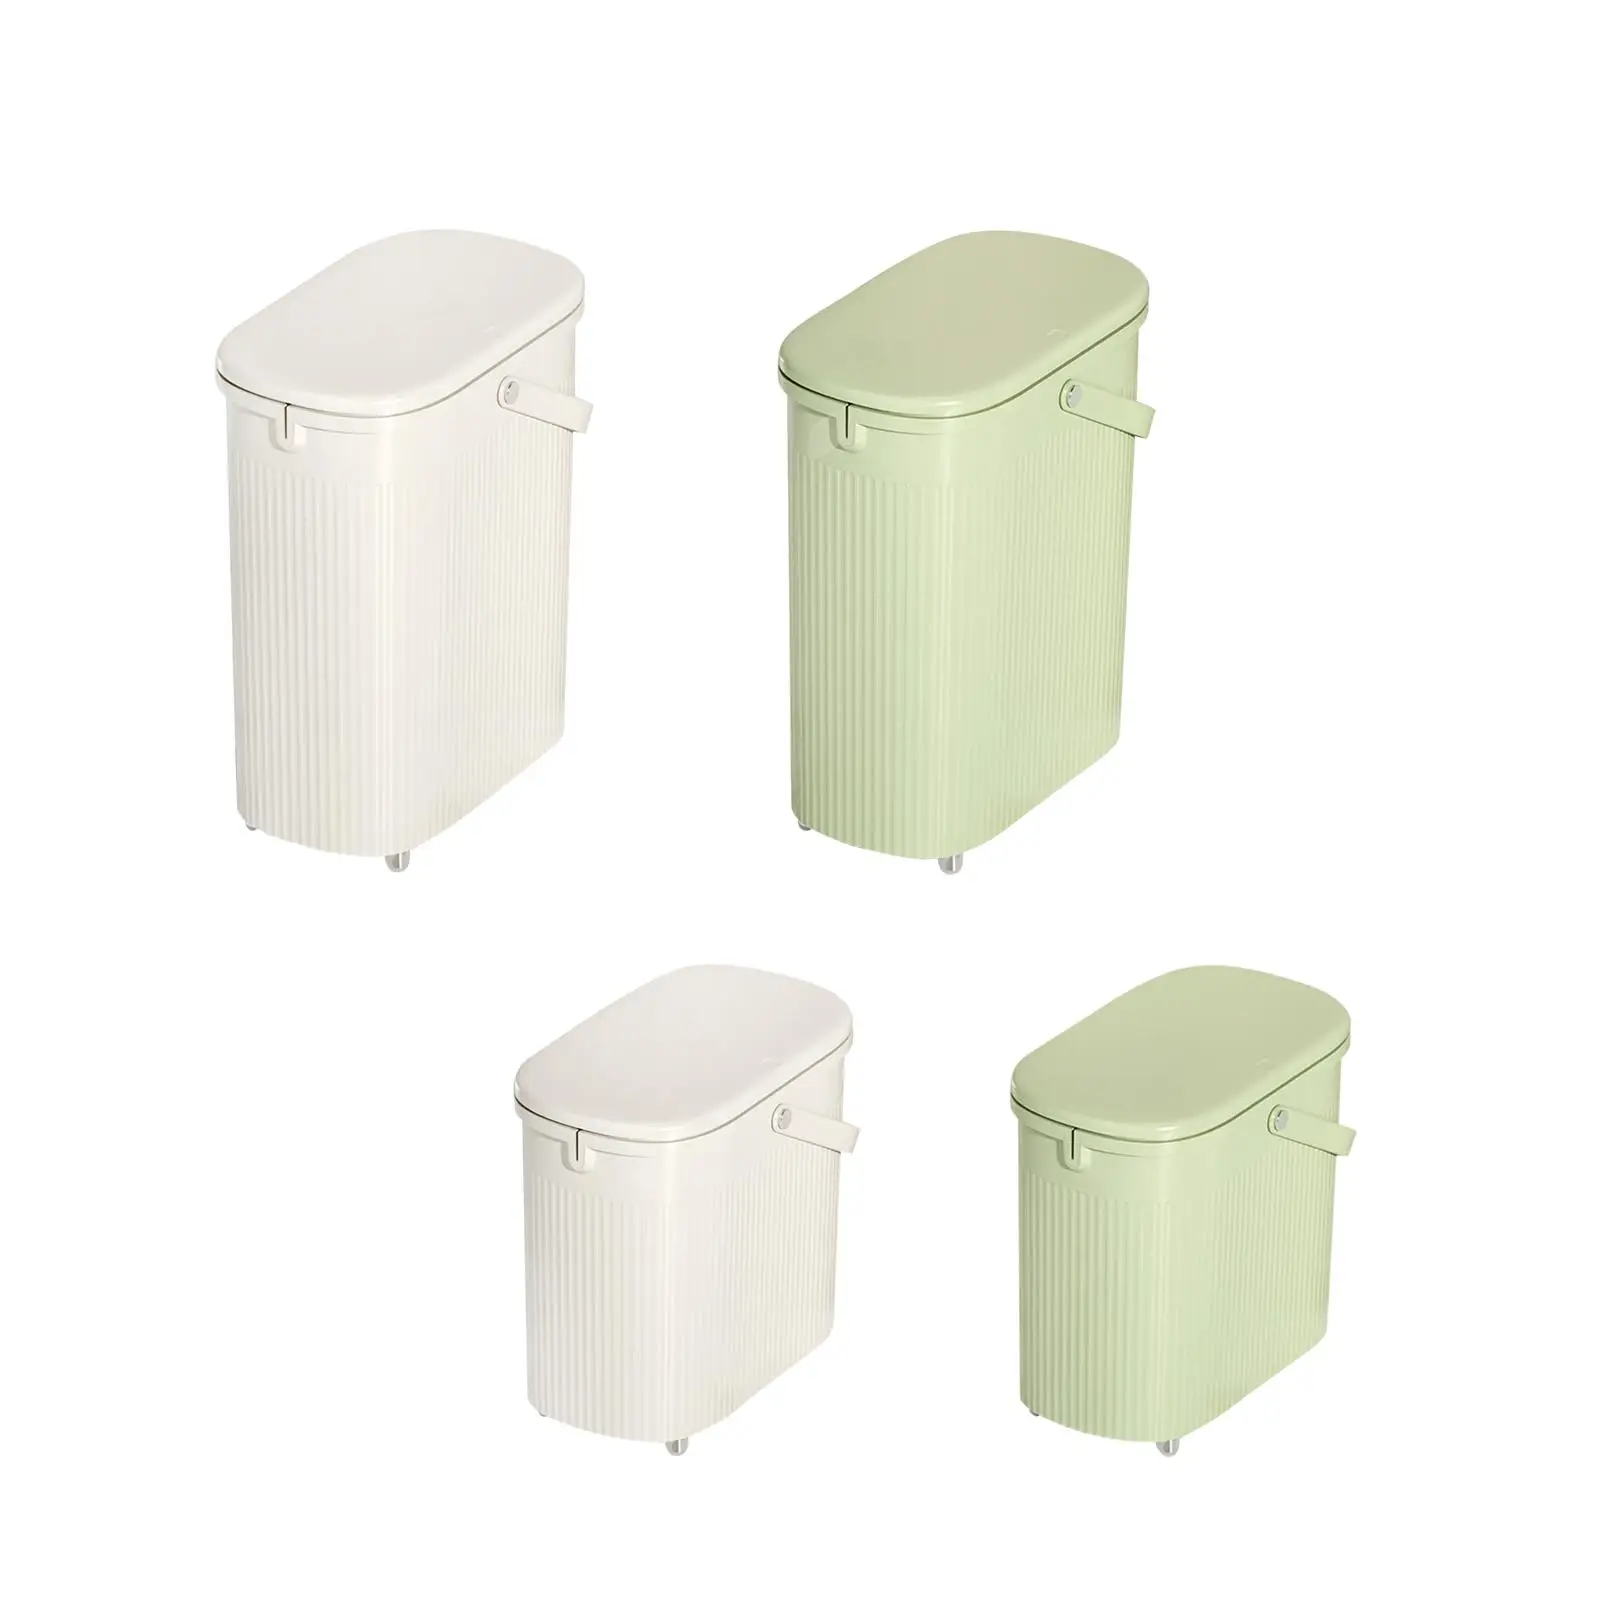 Rectangular Trash Can with Press Type Lid Simple Design Wastebasket Slim Garbage Can for Sunroom Bedroom Entryway Kitchen